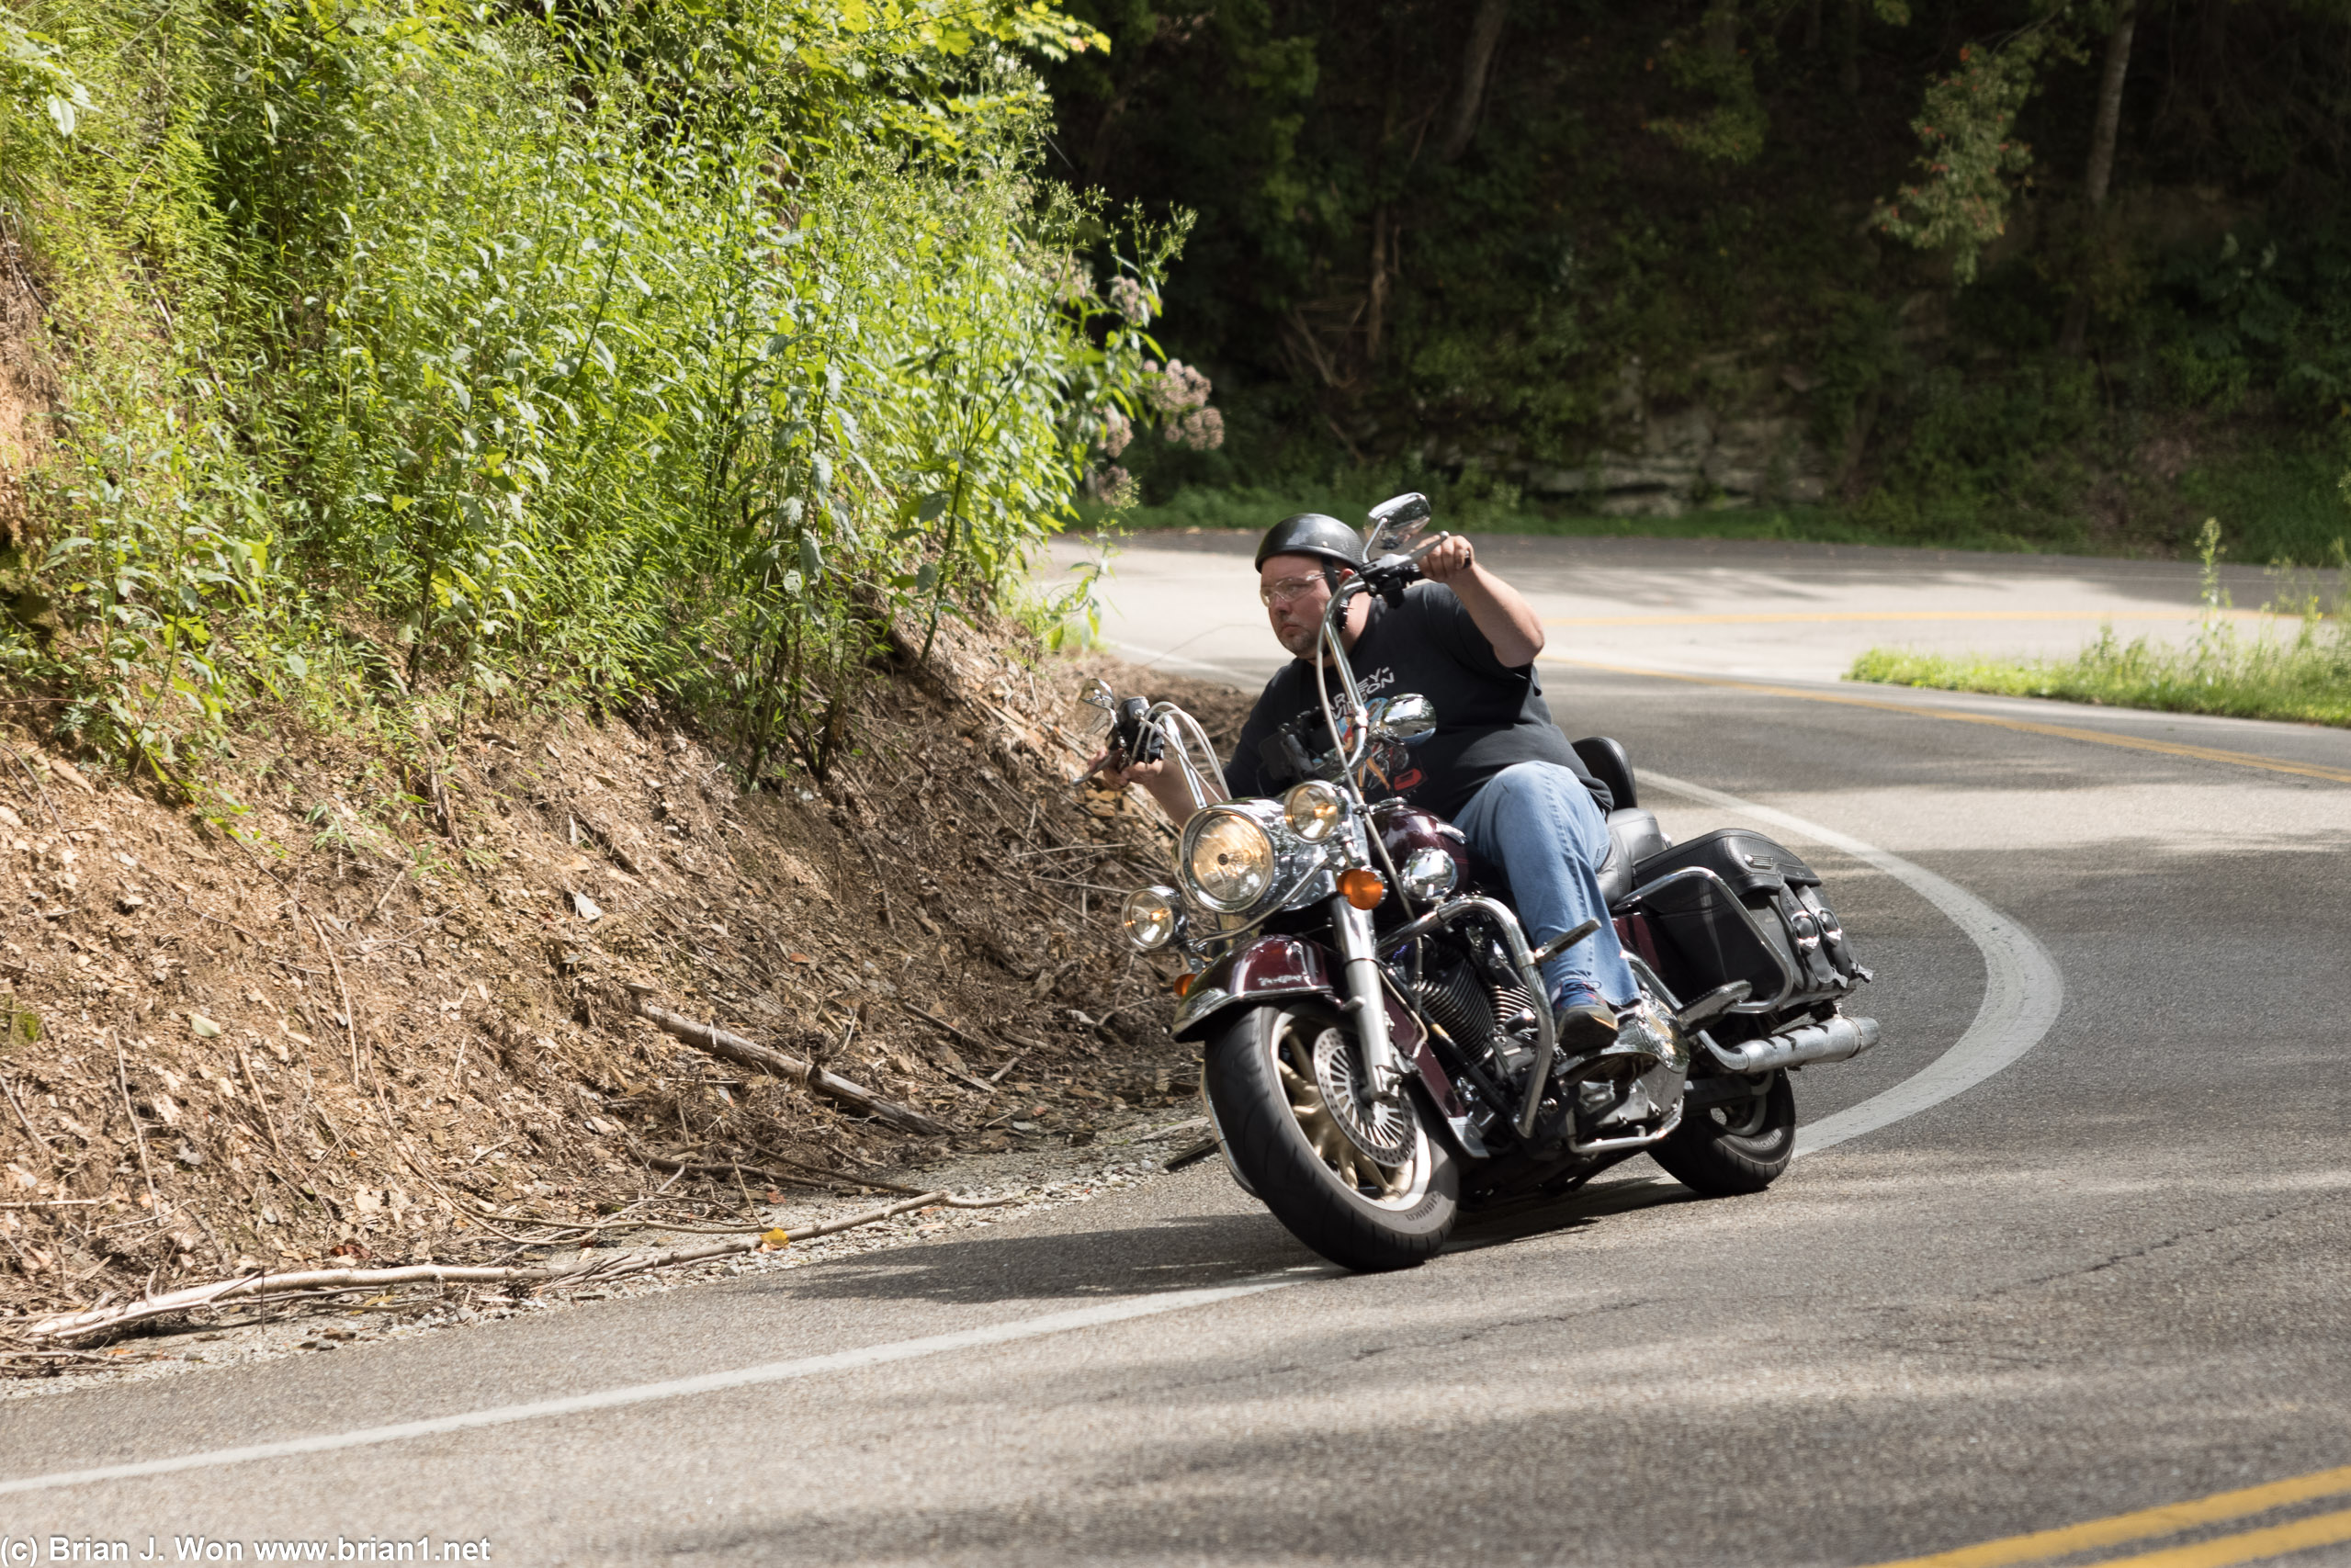 Harleys like the Tail of the Dragon, too.